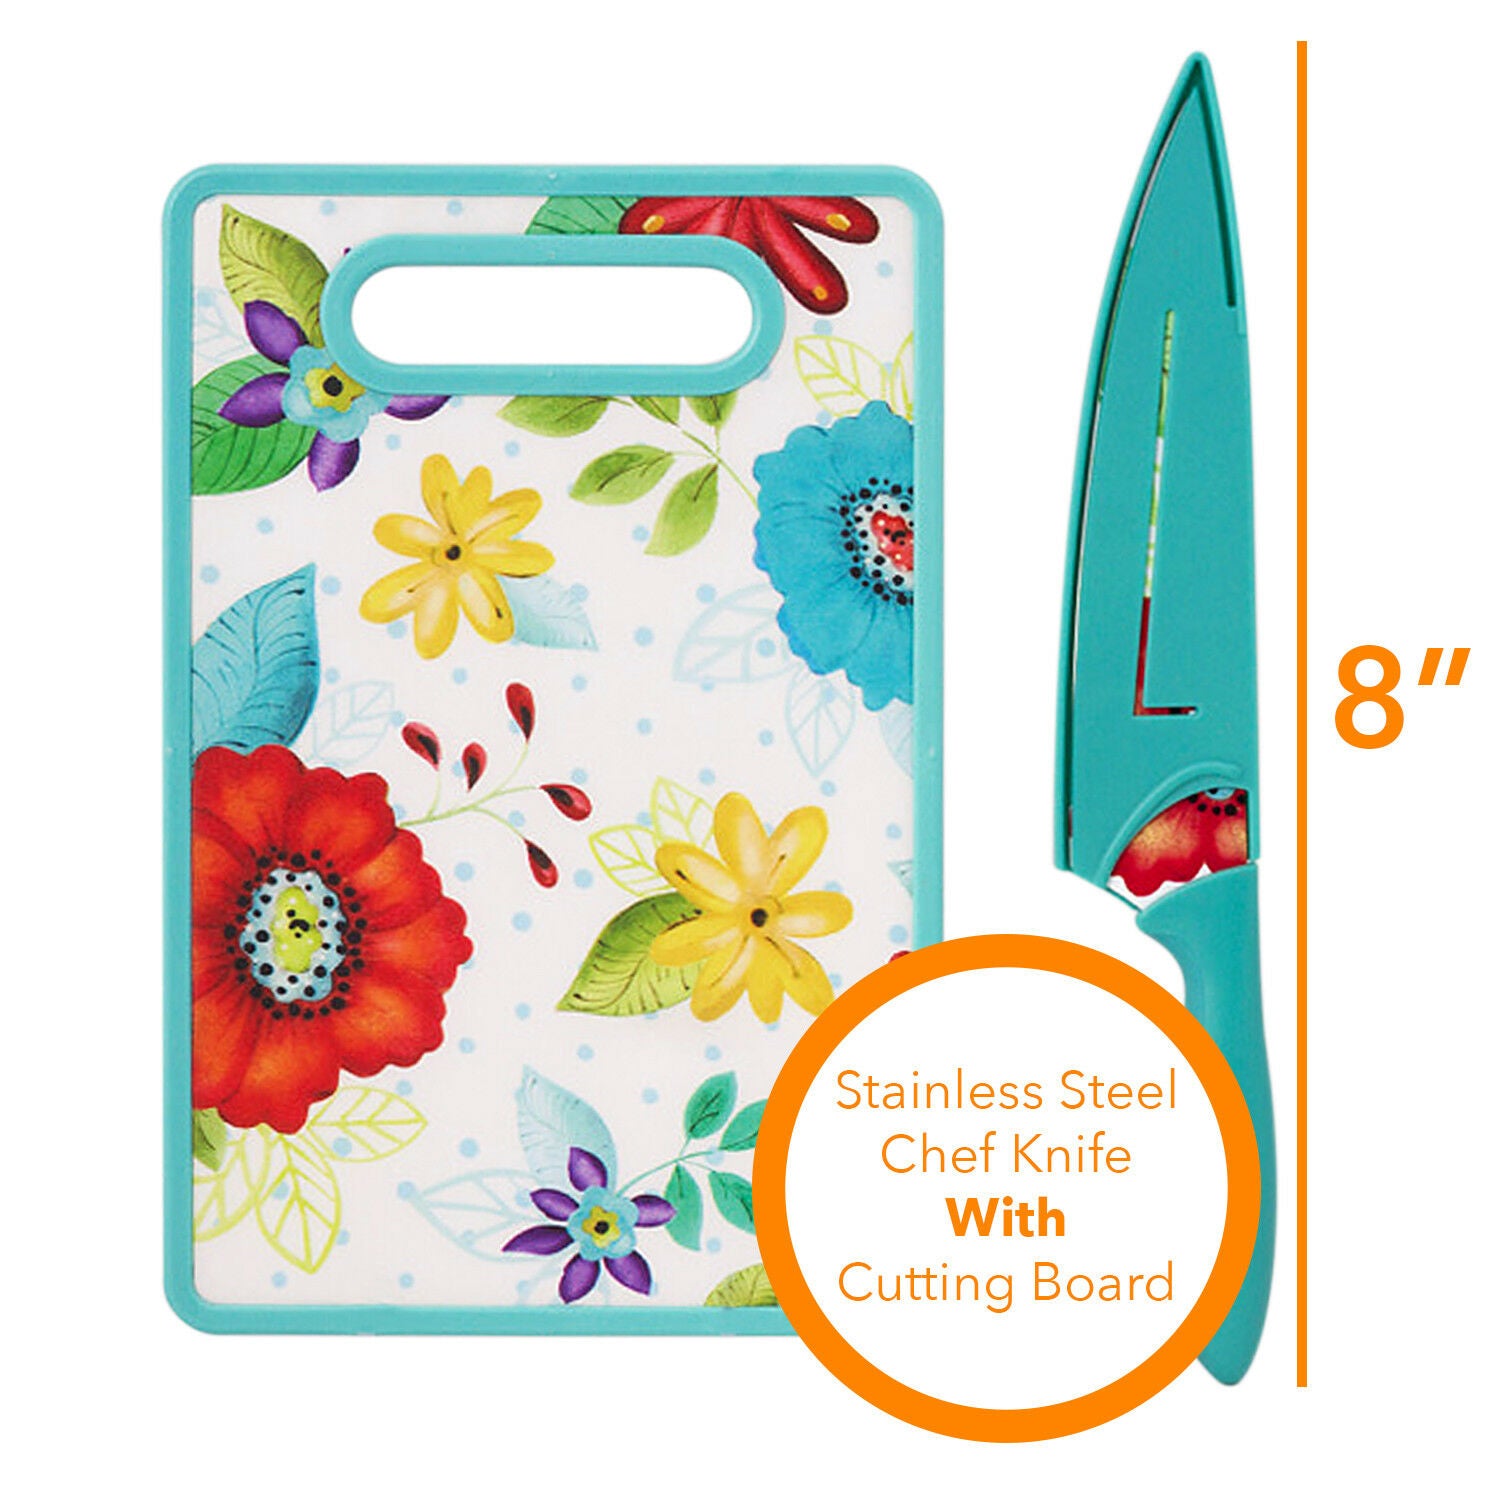 Ceramic Stainless Steel Chef Knife W/ Shealth & Cutting Board Set Floral Design